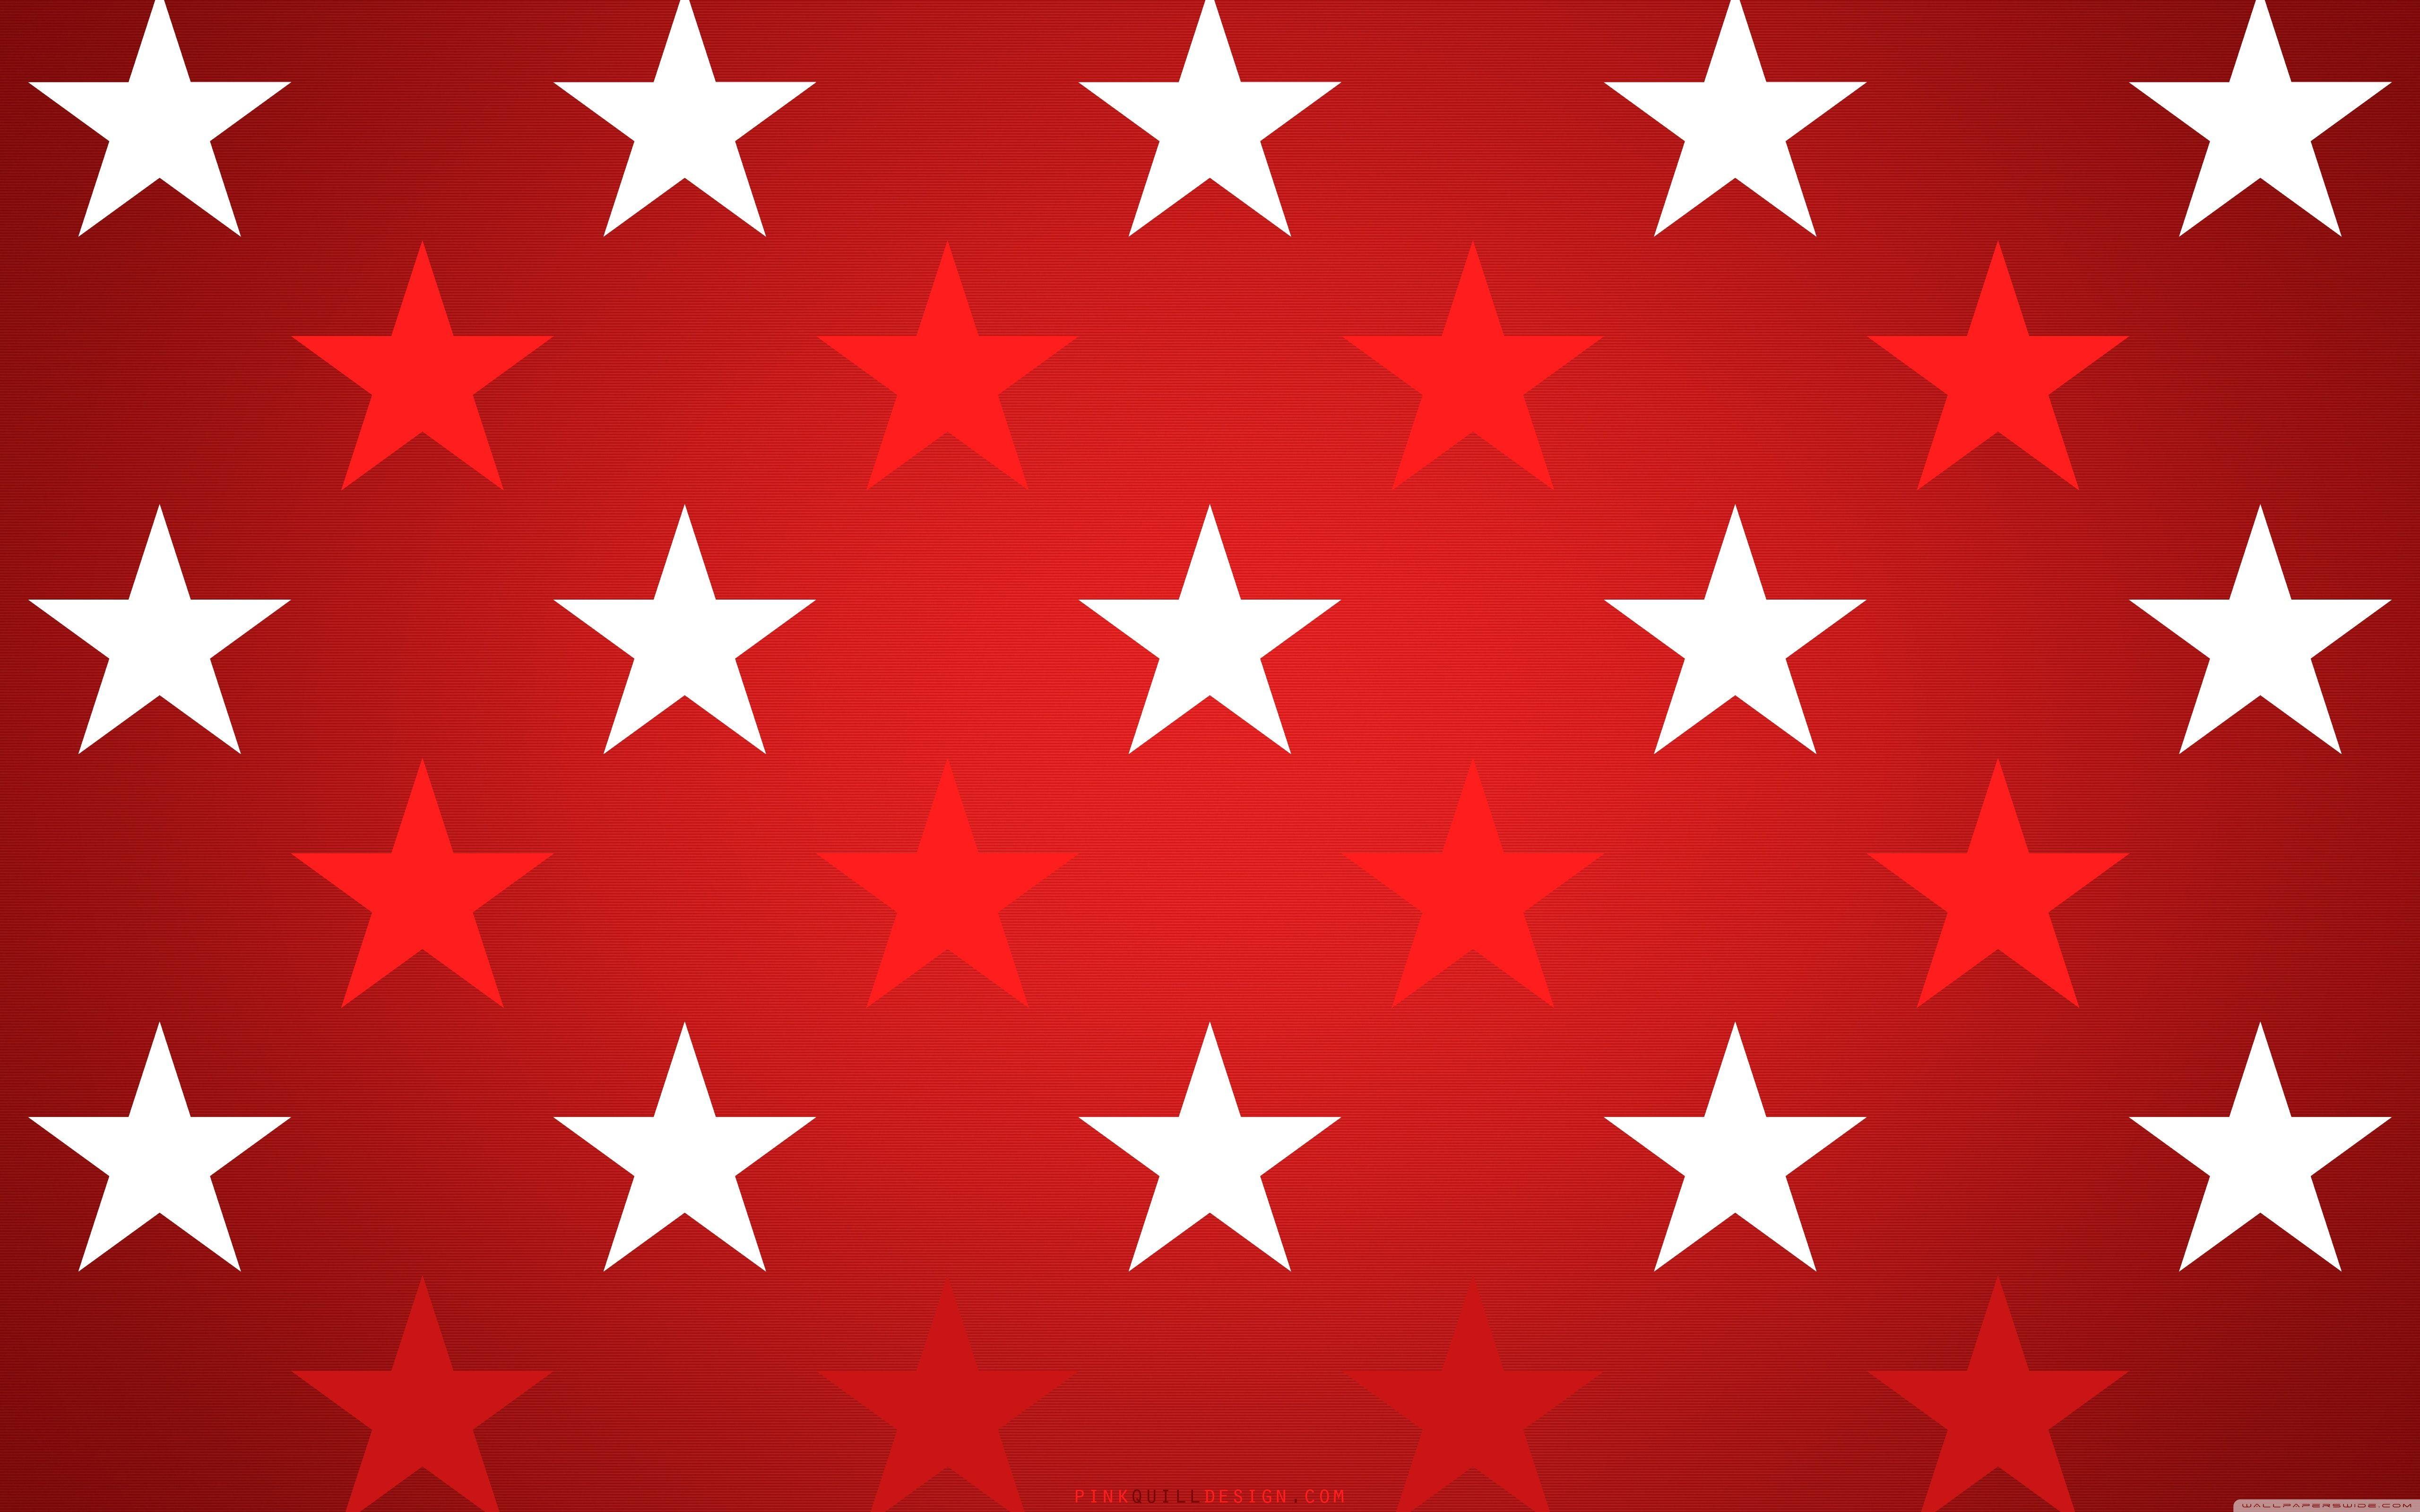 Red Star Wallpapers Top Free Red Star Backgrounds Wallpaperaccess